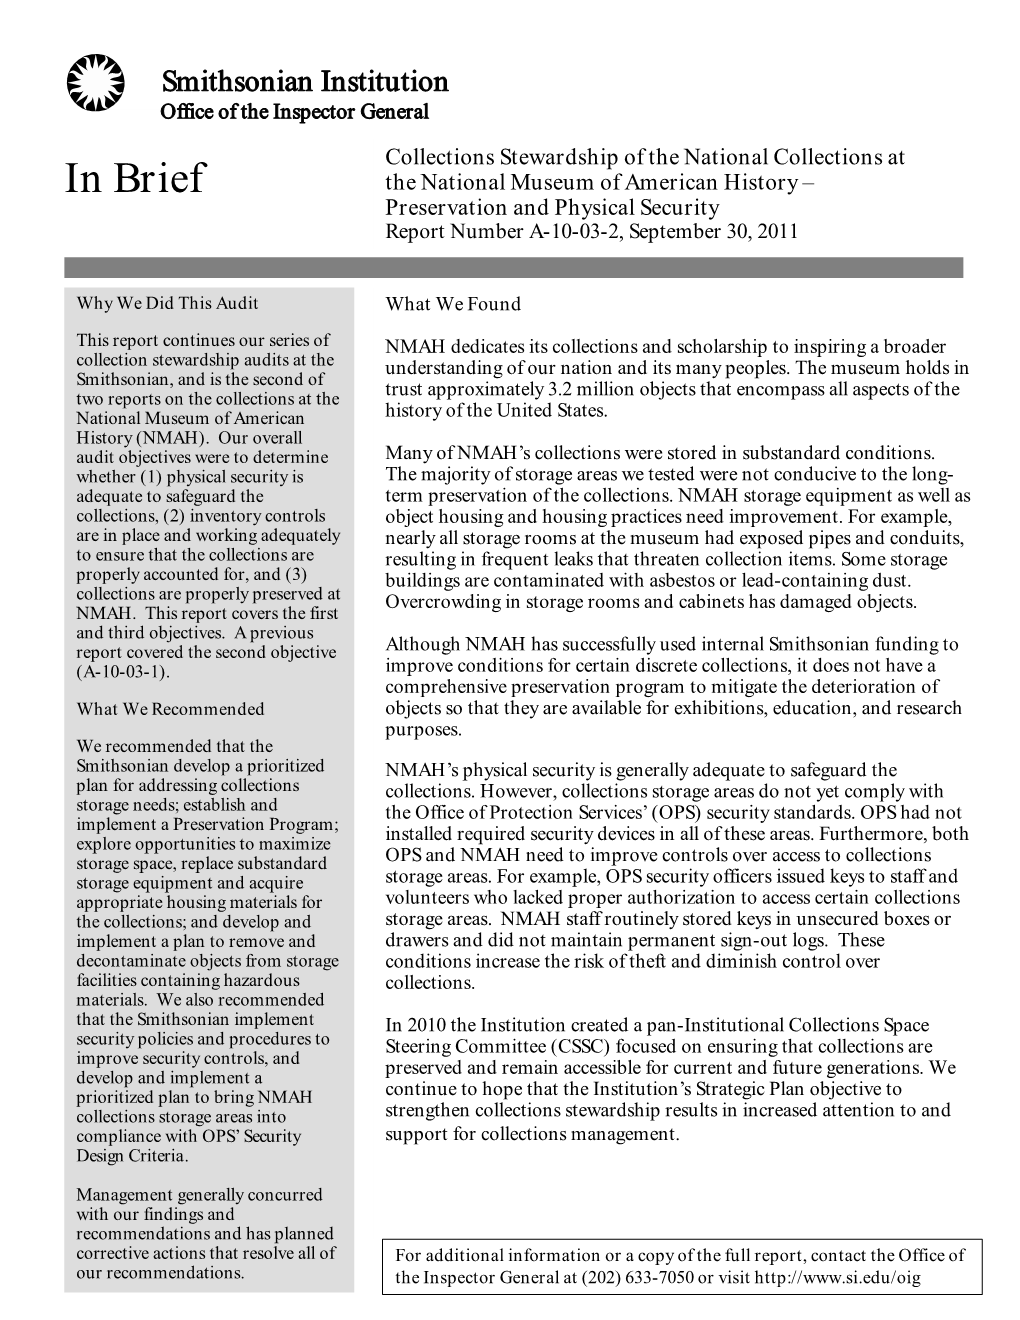 In Brief the National Museum of American History – Preservation and Physical Security Report Number A-10-03-2, September 30, 2011